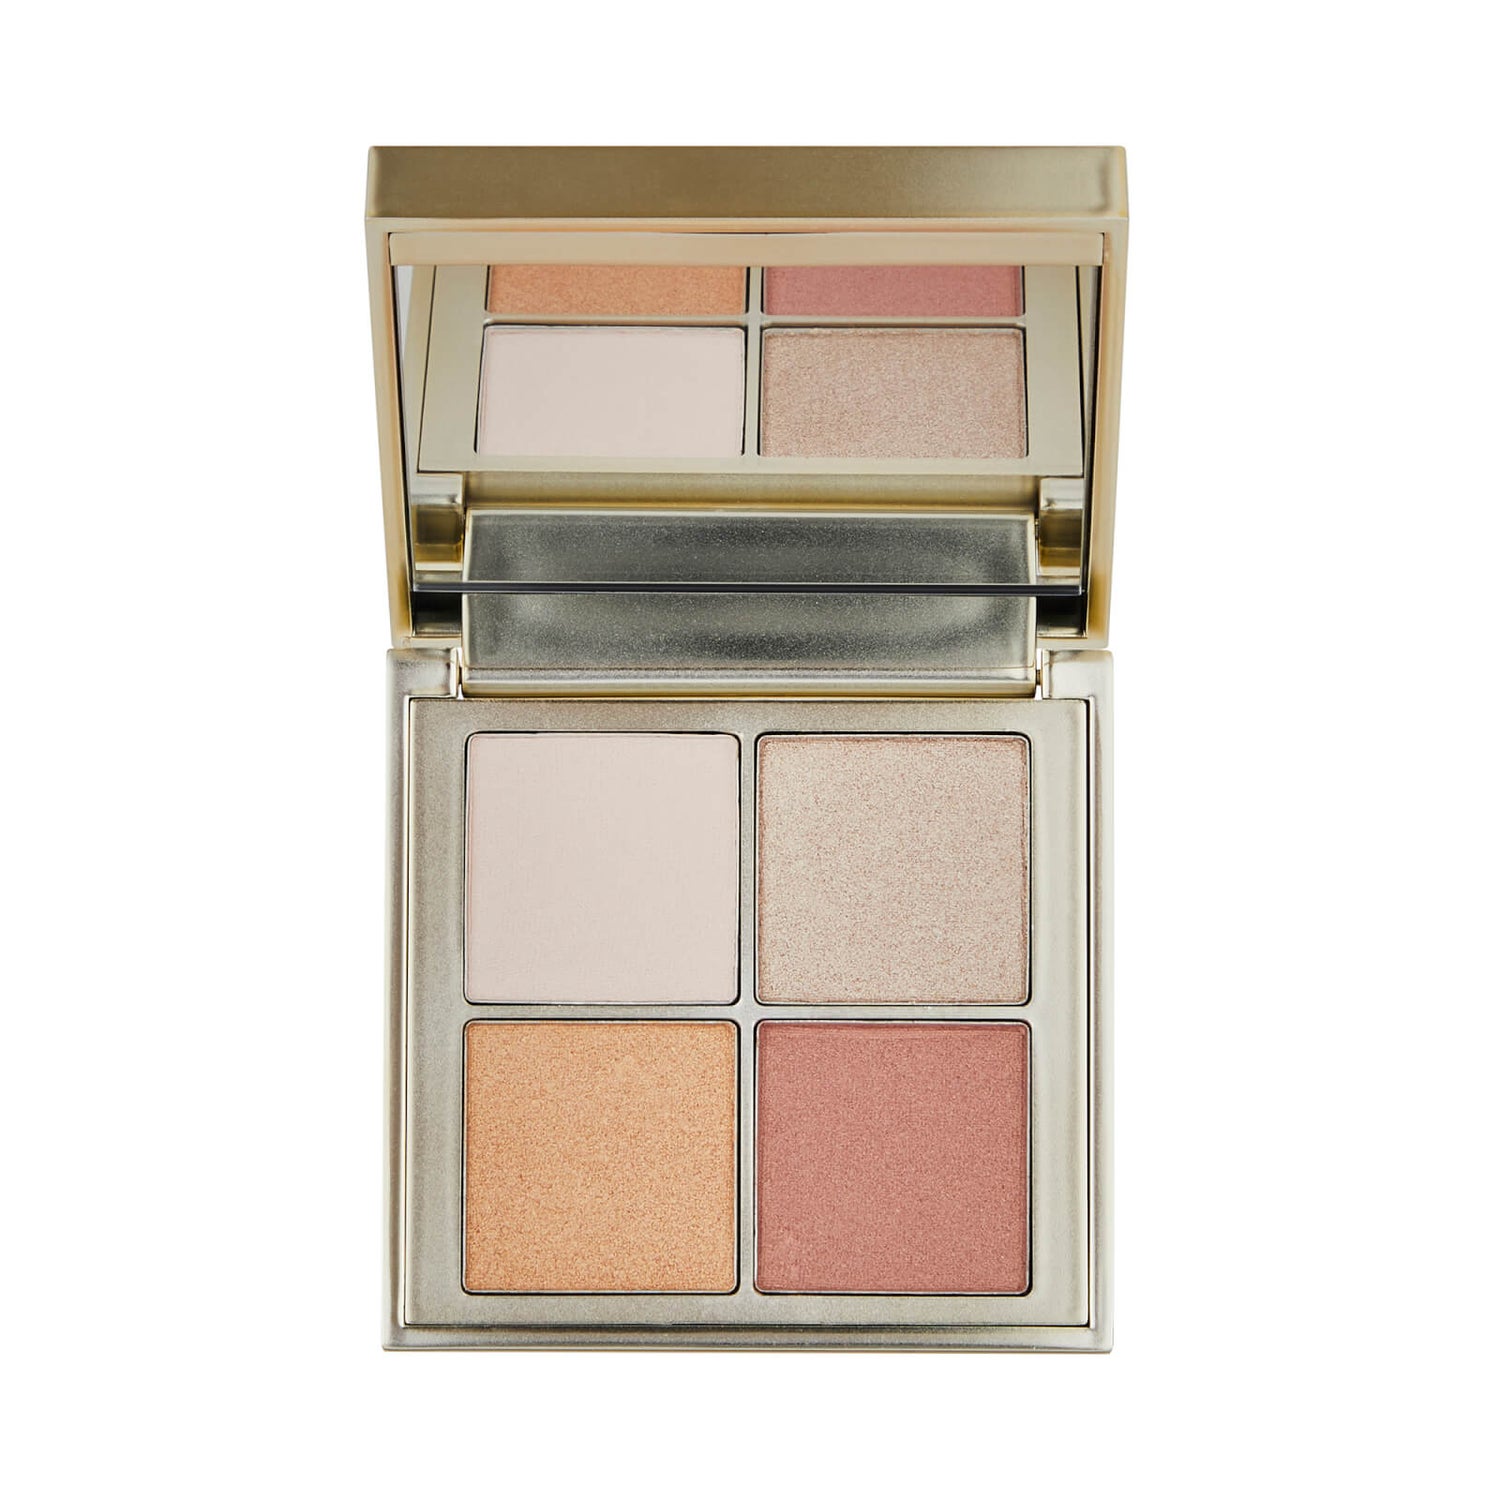 Limited Edition Pink Collection Eyeshadow Quad 4.8g